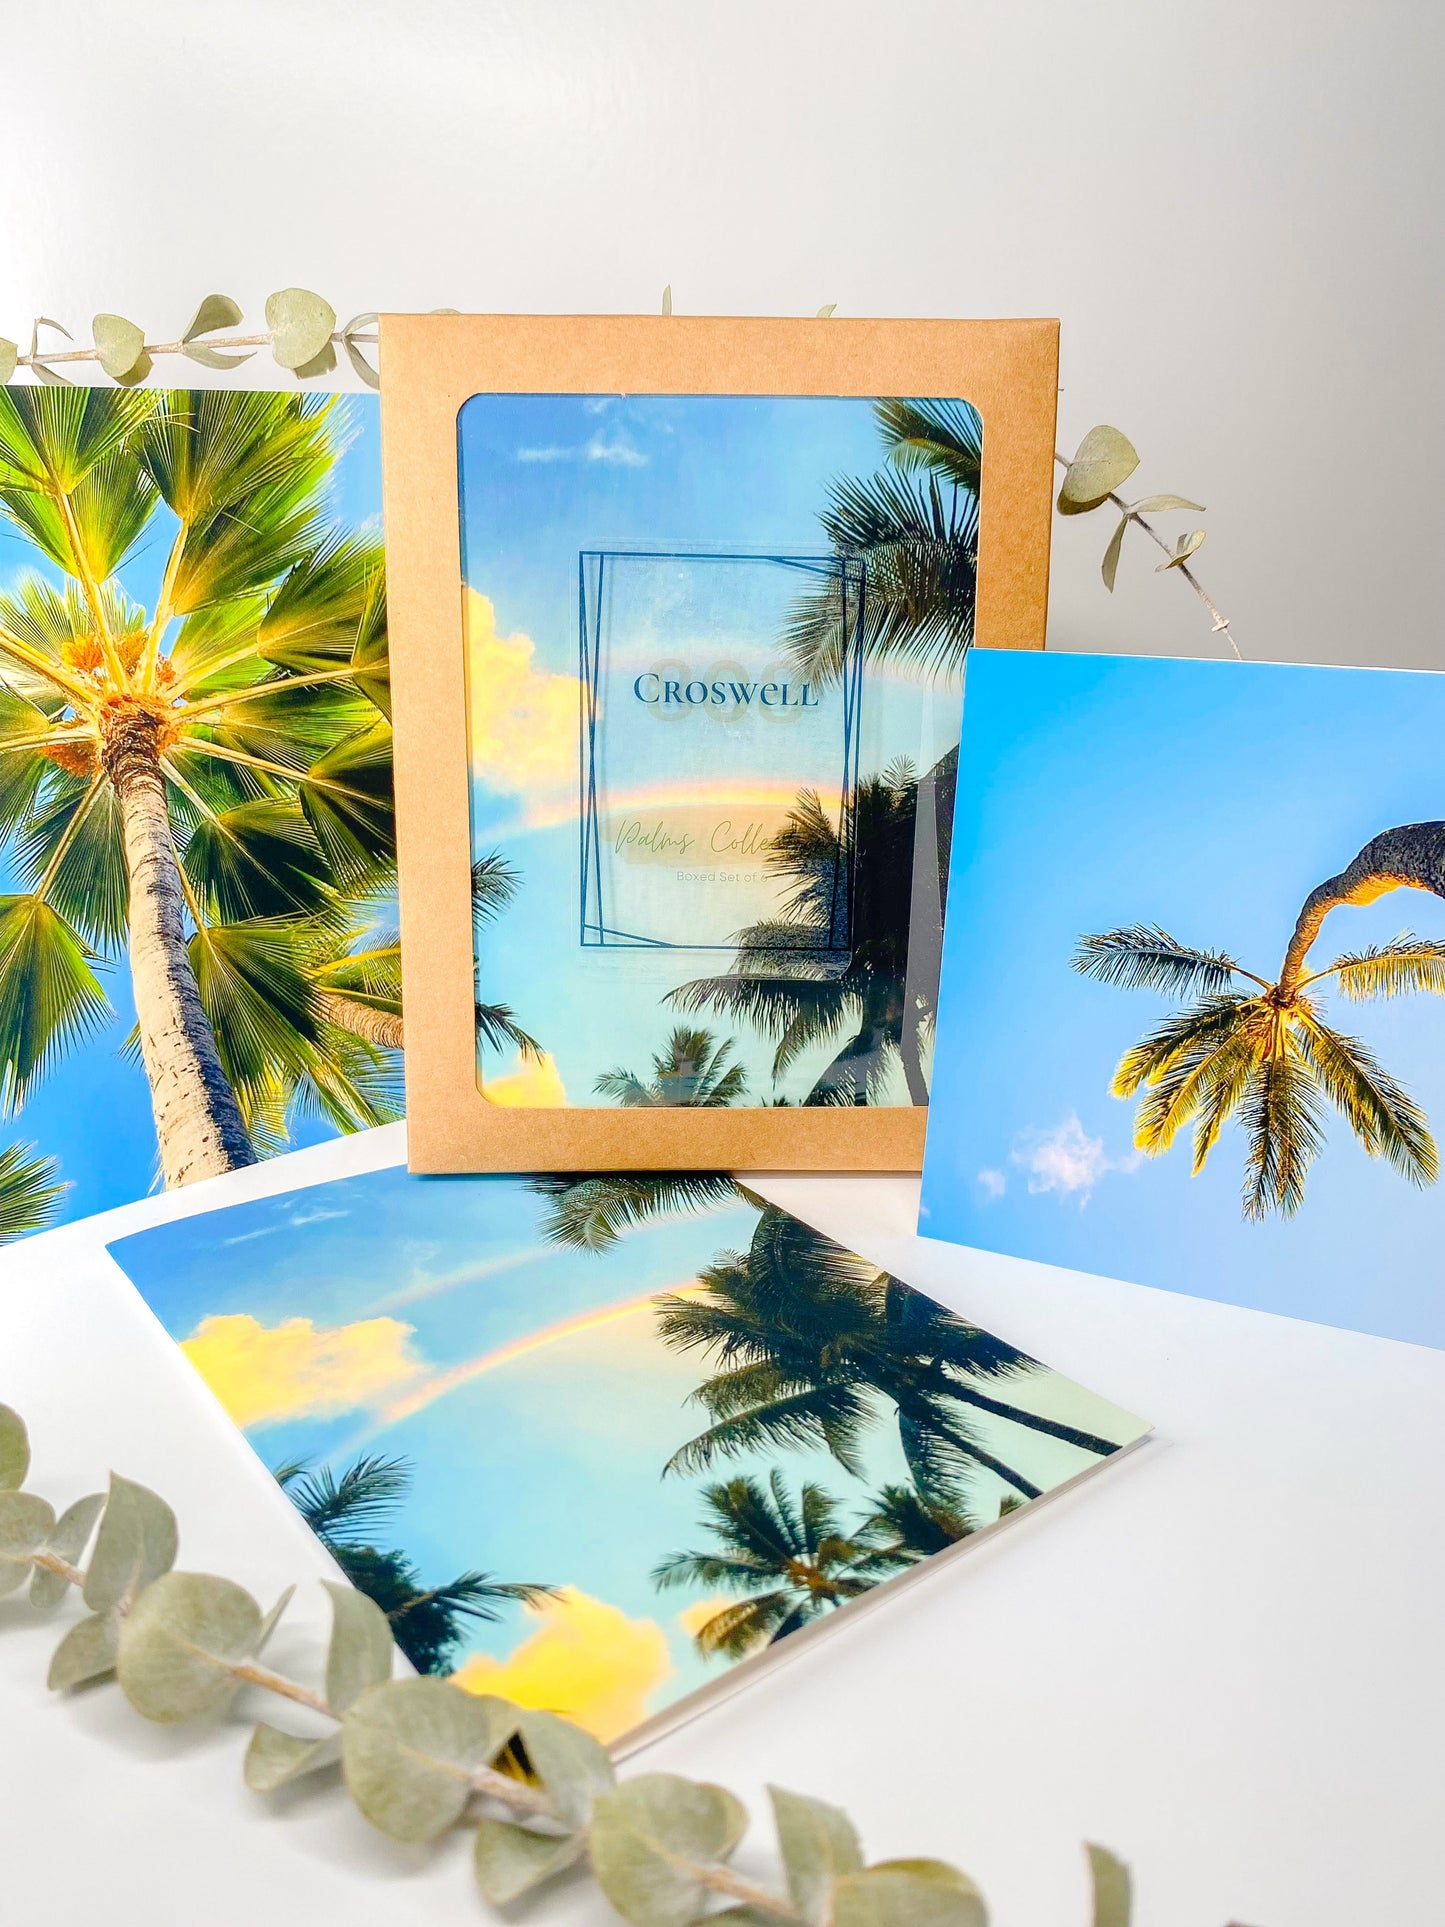 Palms Collection - Boxed Set of 6 Notecards